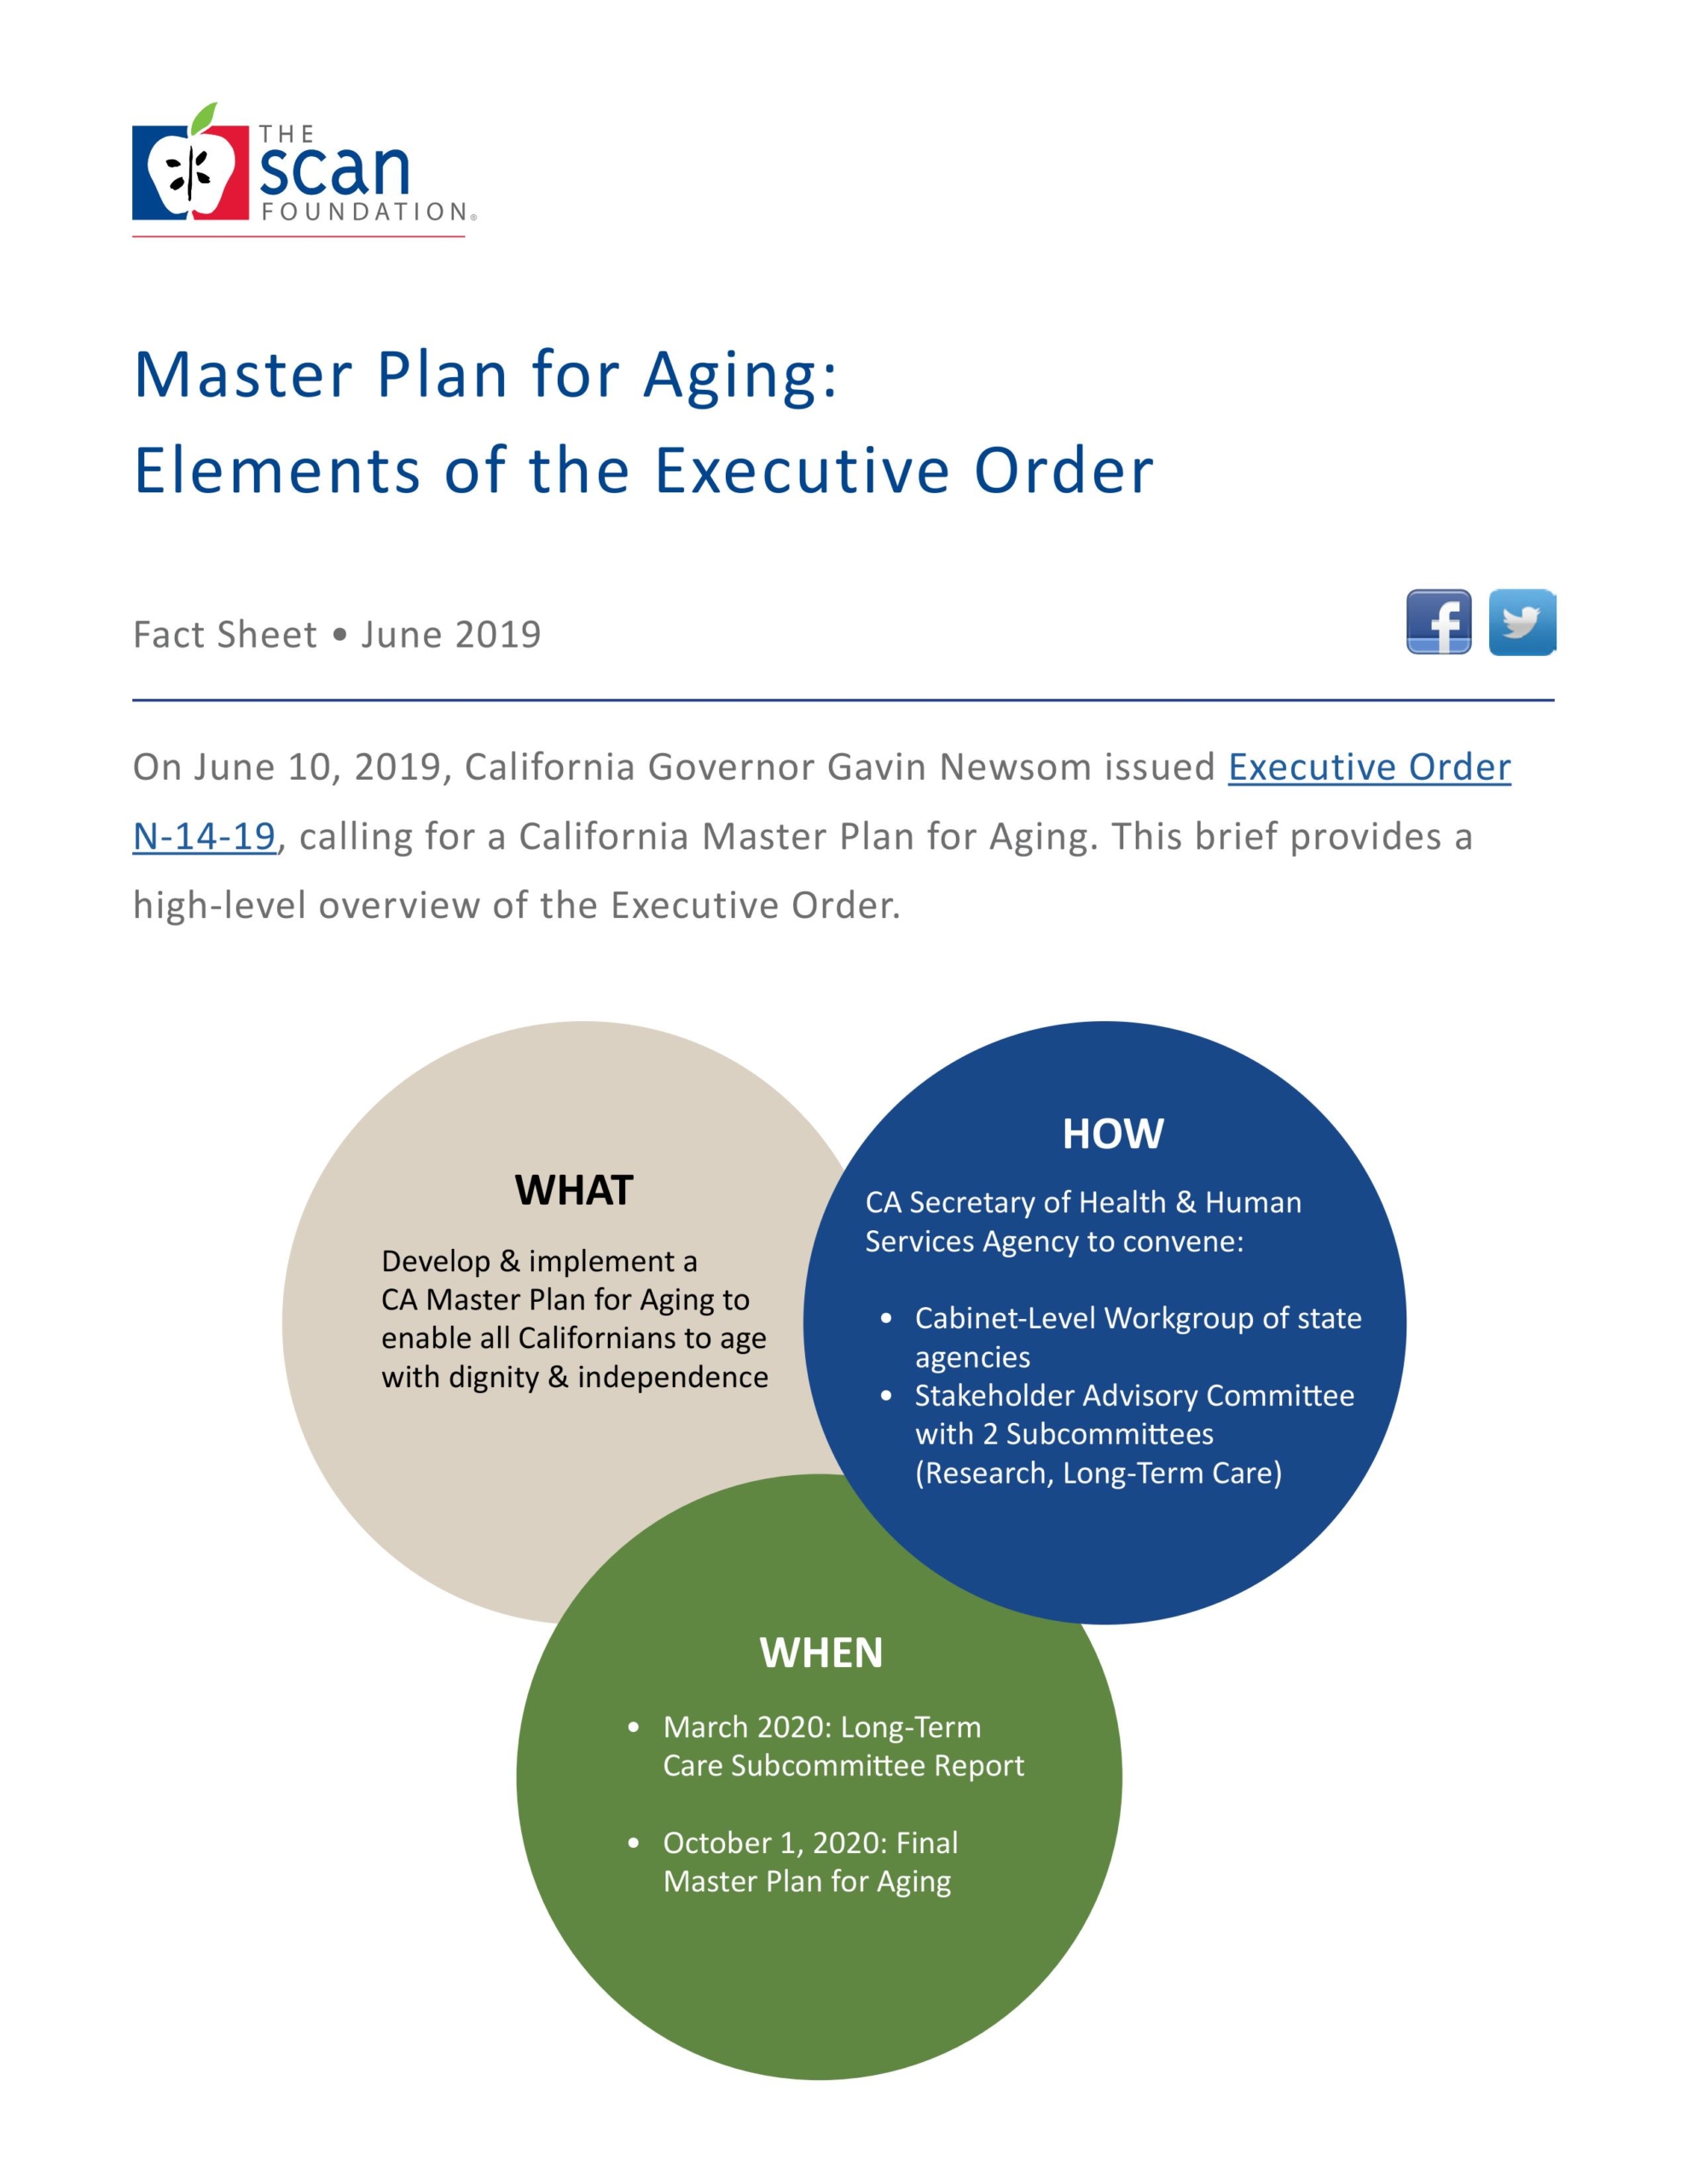 Master Plan for Aging: Elements of the Executive Order